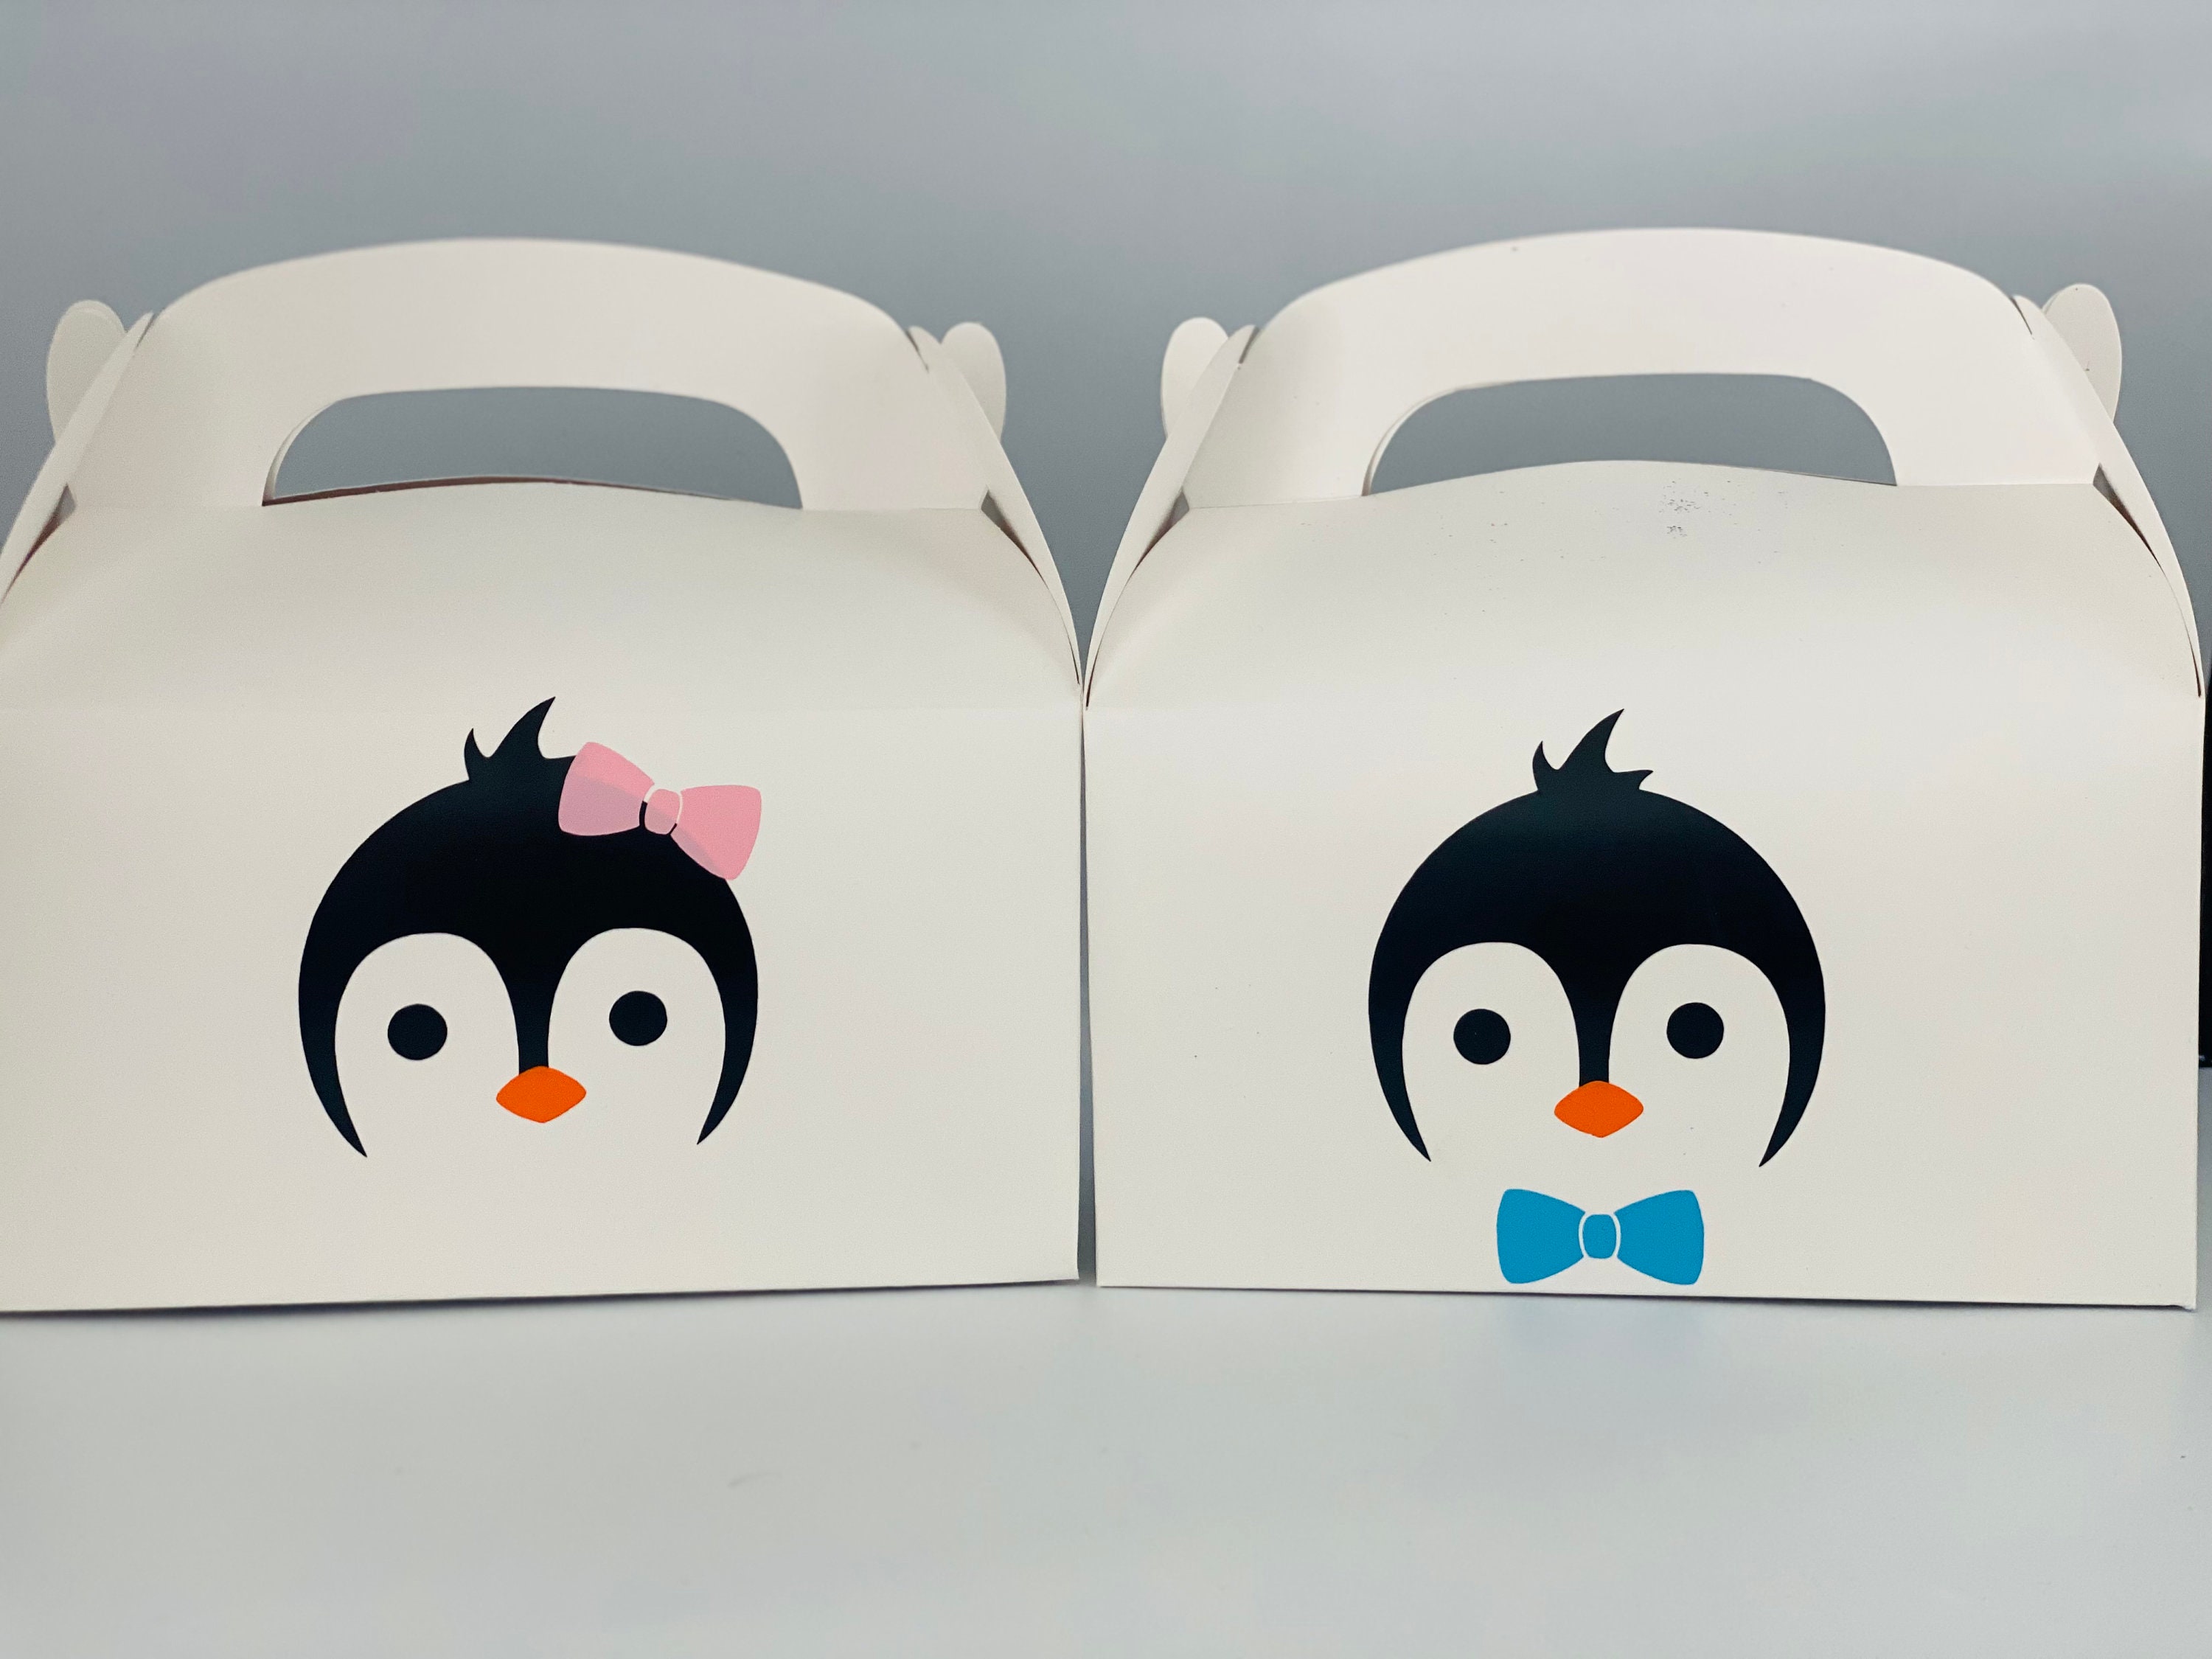 Penguin Winter Party Goodie Boxes Set – created and sold by  PaperPartyParade on